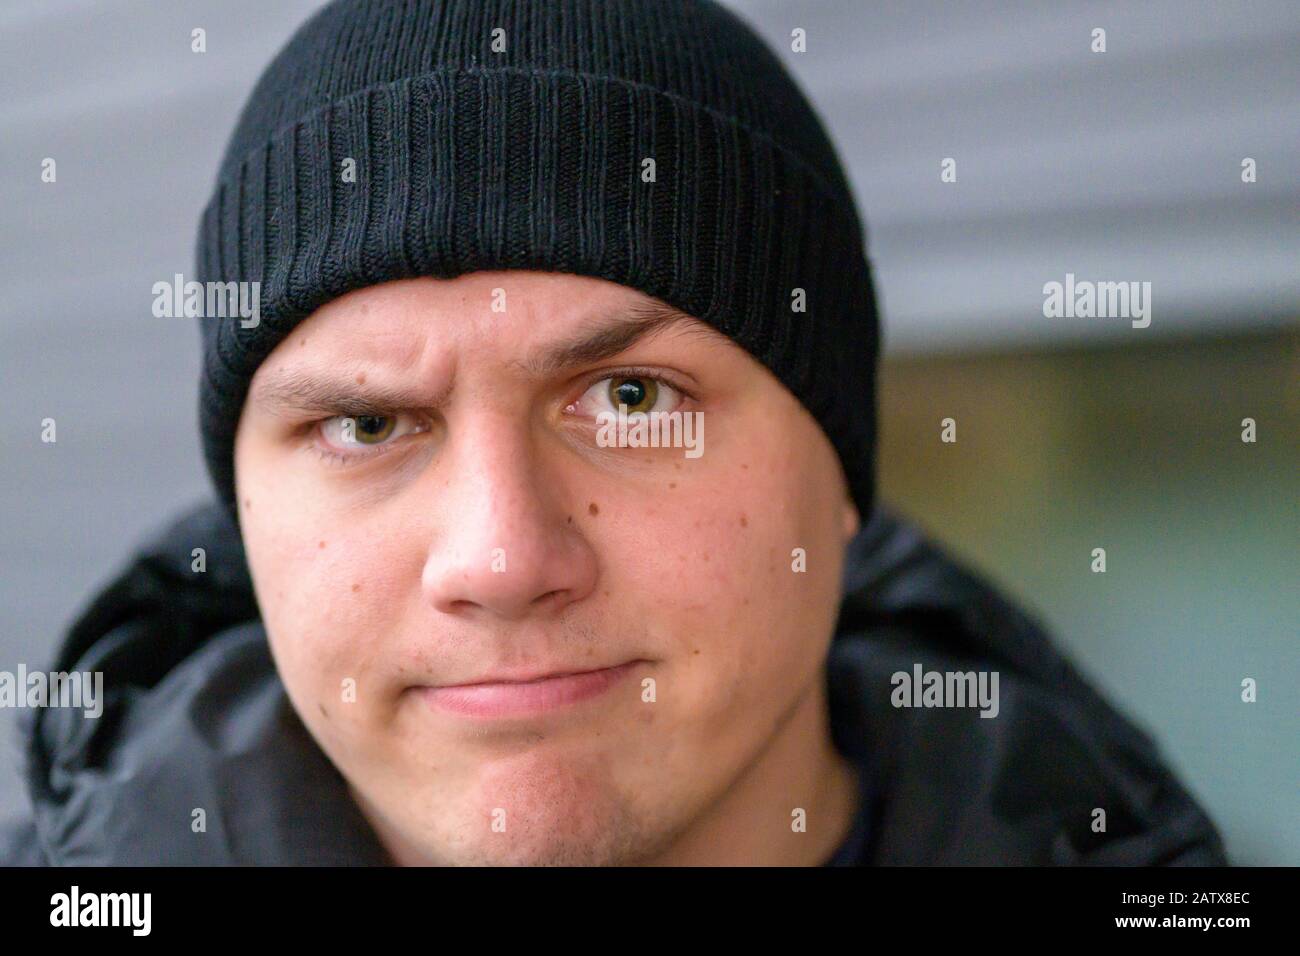 Determined sceptical young man wearing a beanie and warm jacket standing outdoors in winter frowning at the camera with raised eyebrow and a grimace Stock Photo